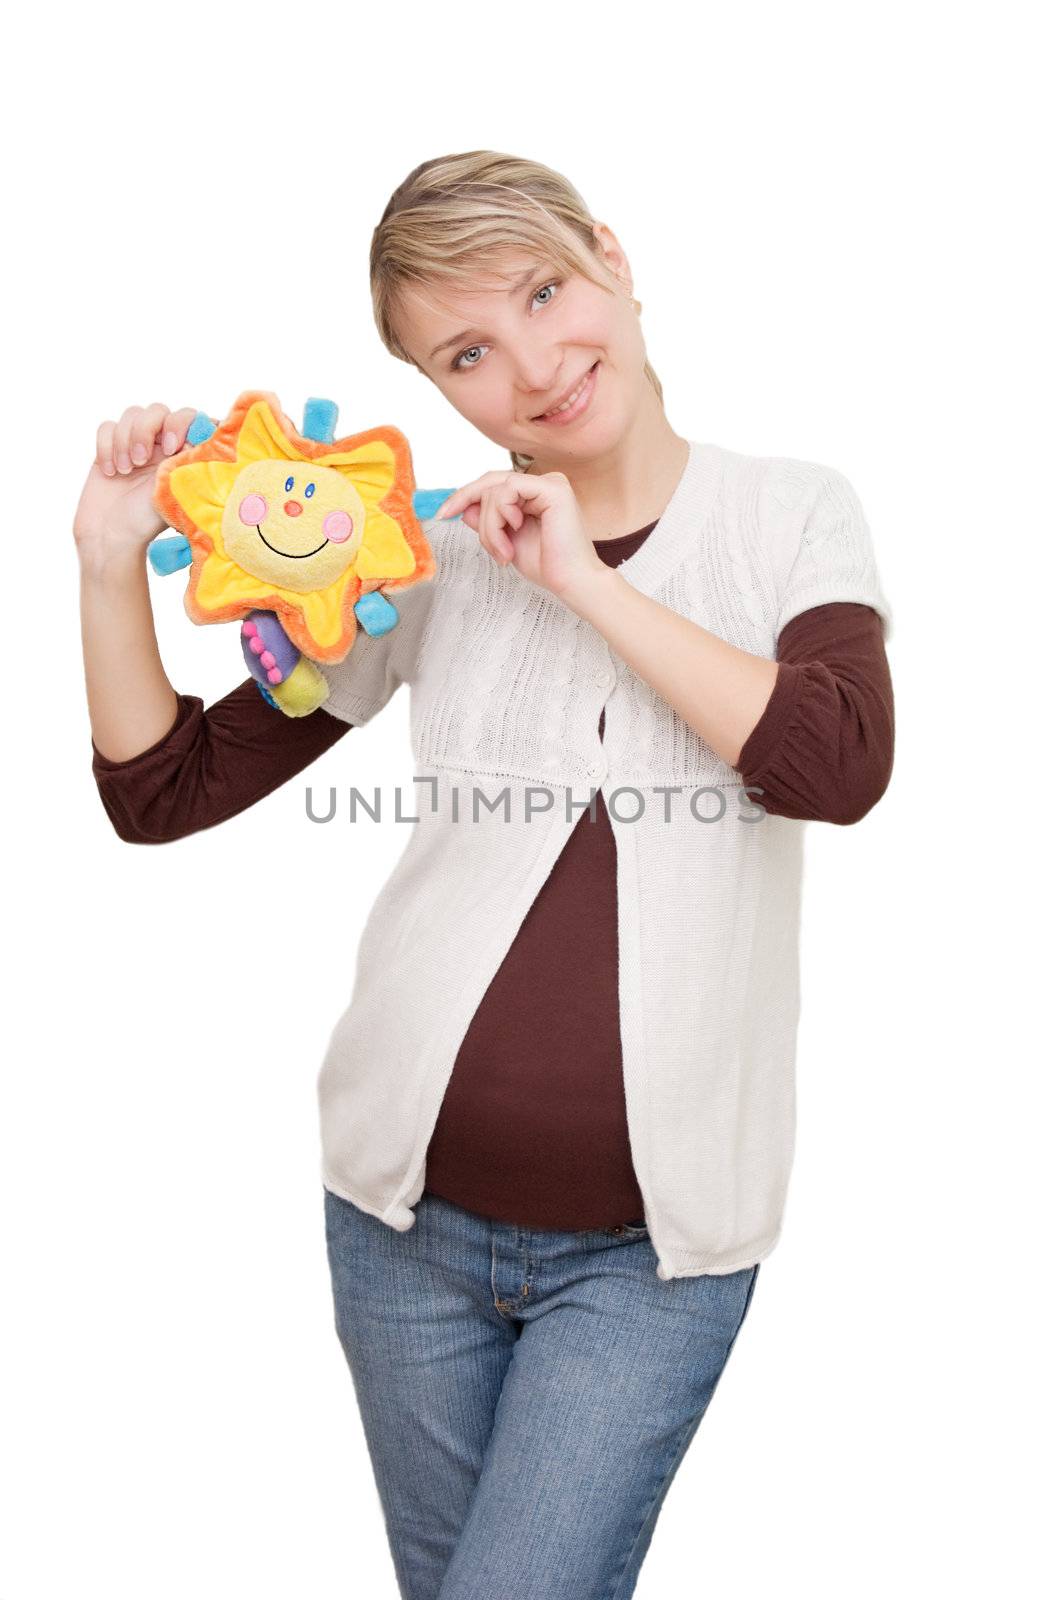 Smiling woman holding sunny toy over white